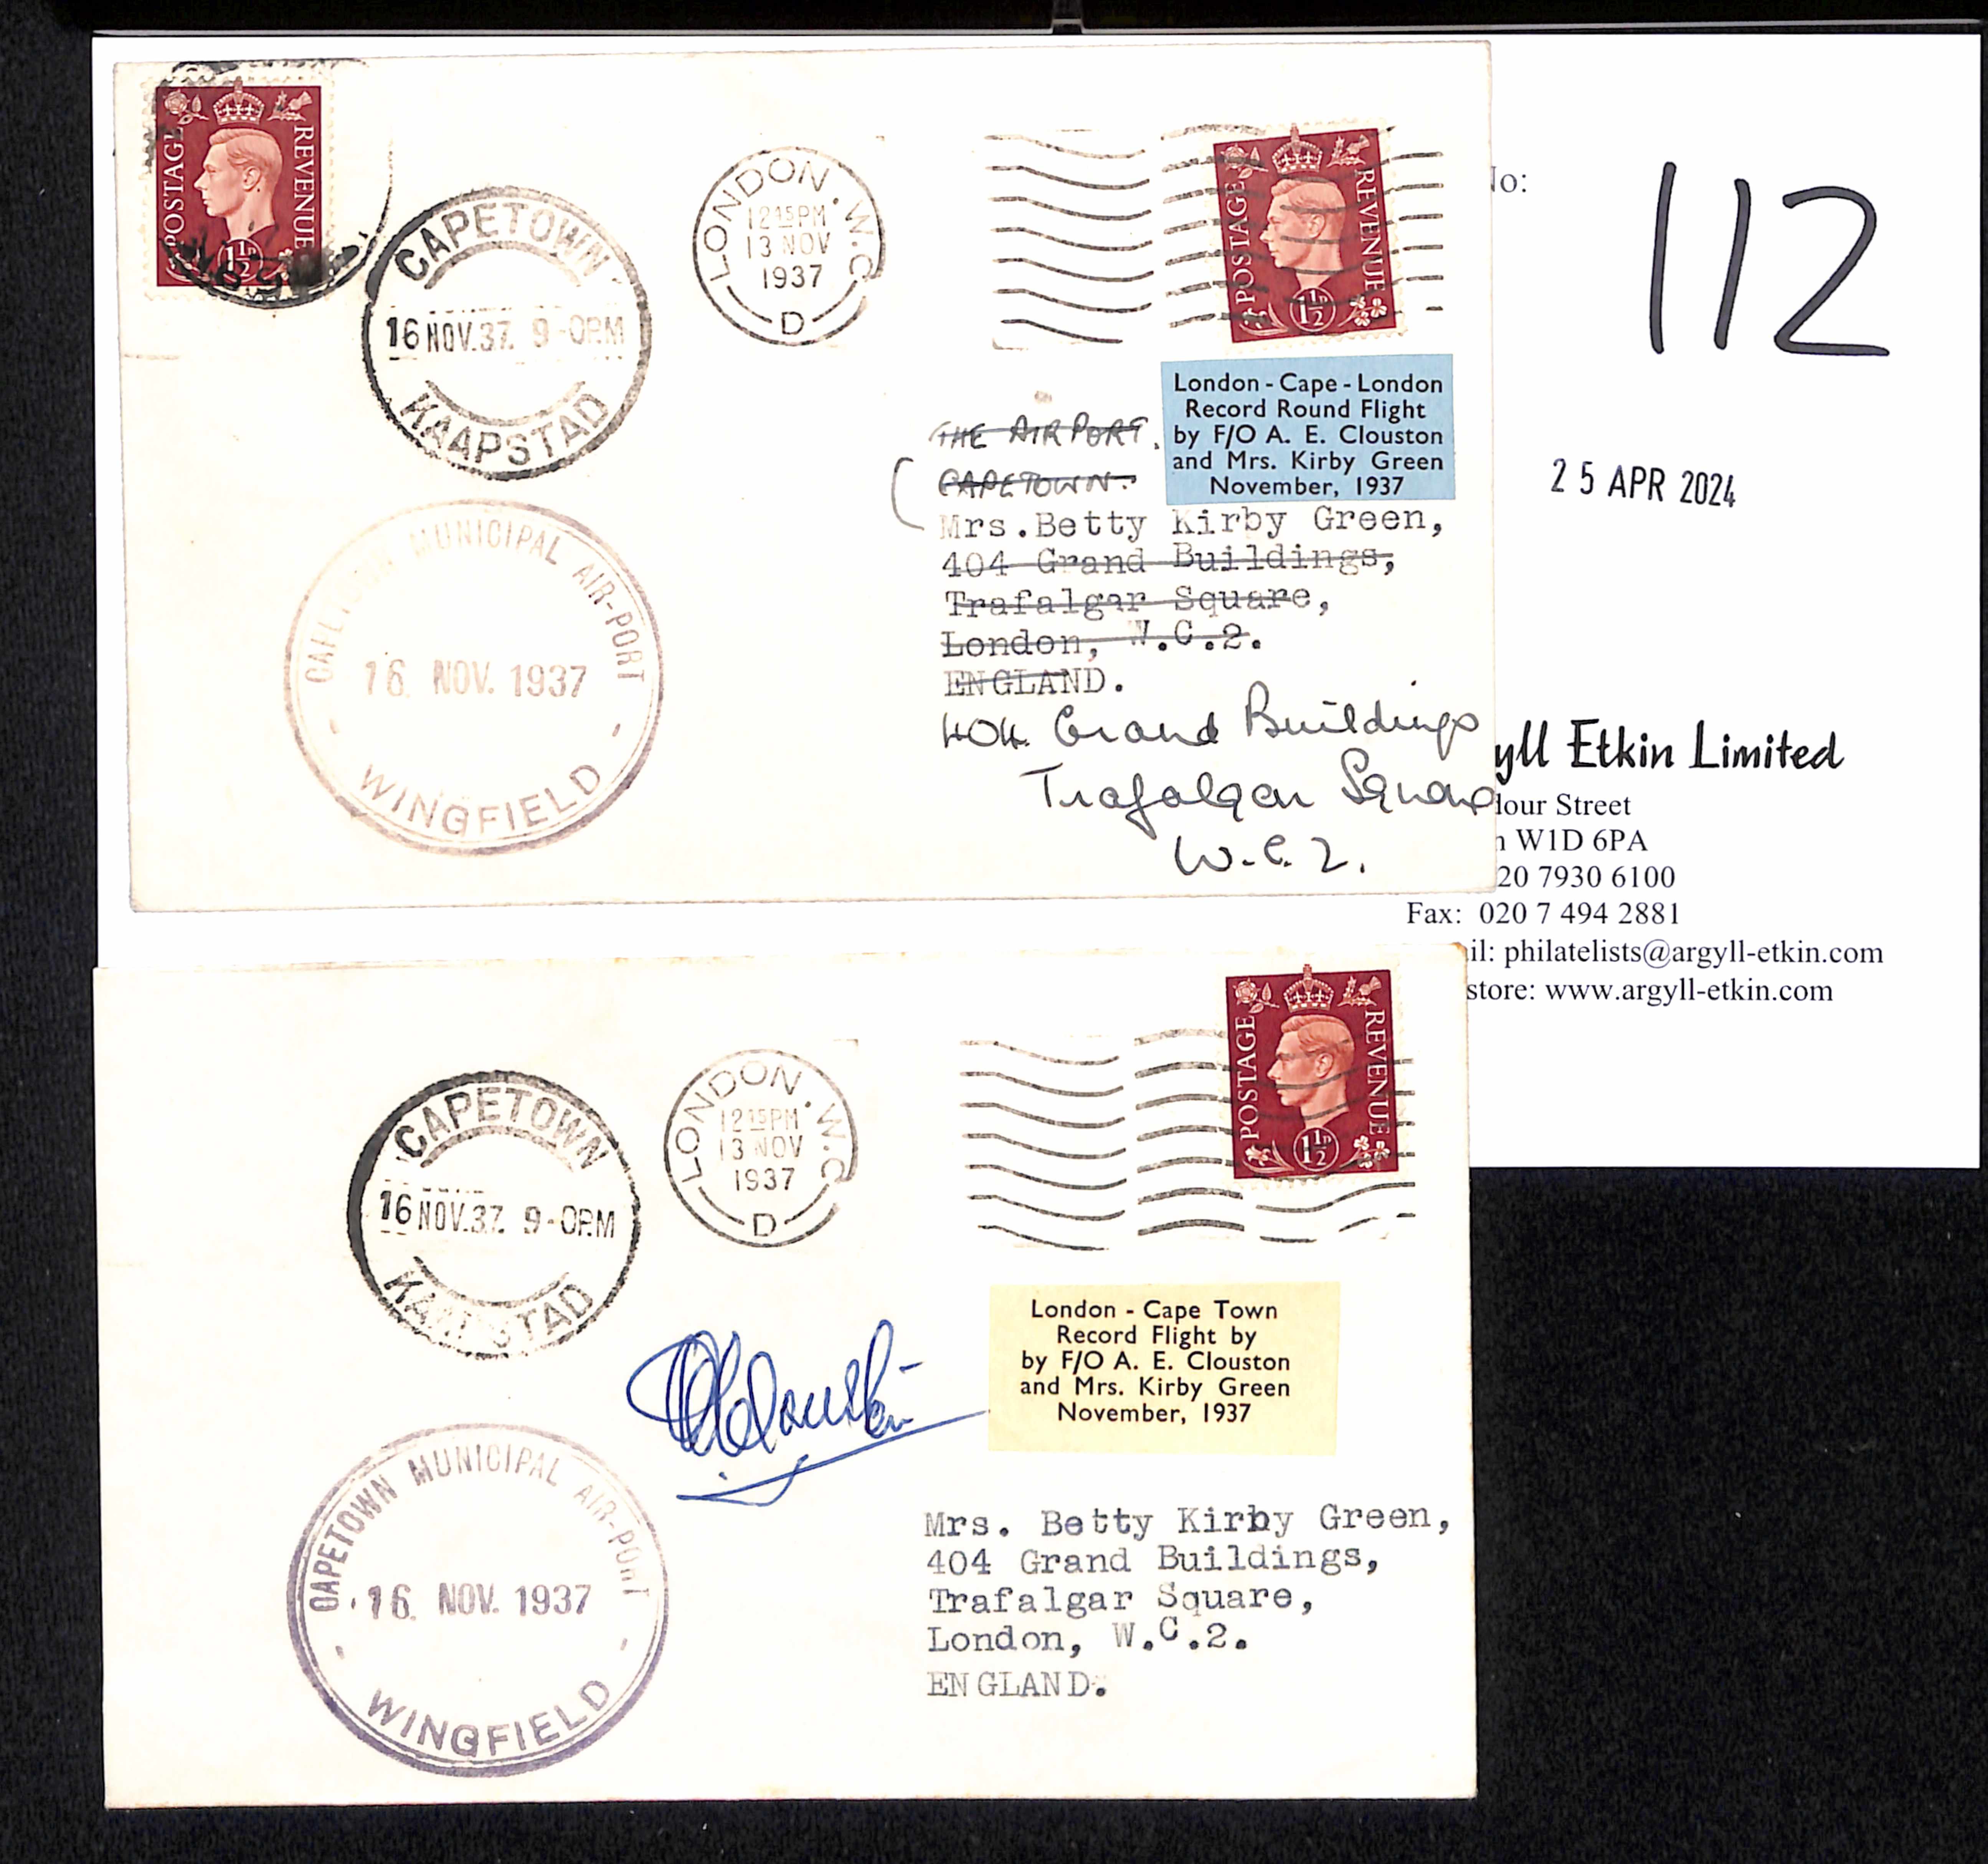 1937 (Nov 13) A.E. Clouston and Mrs Kirby-Green London to Cape Town record flight, covers franked